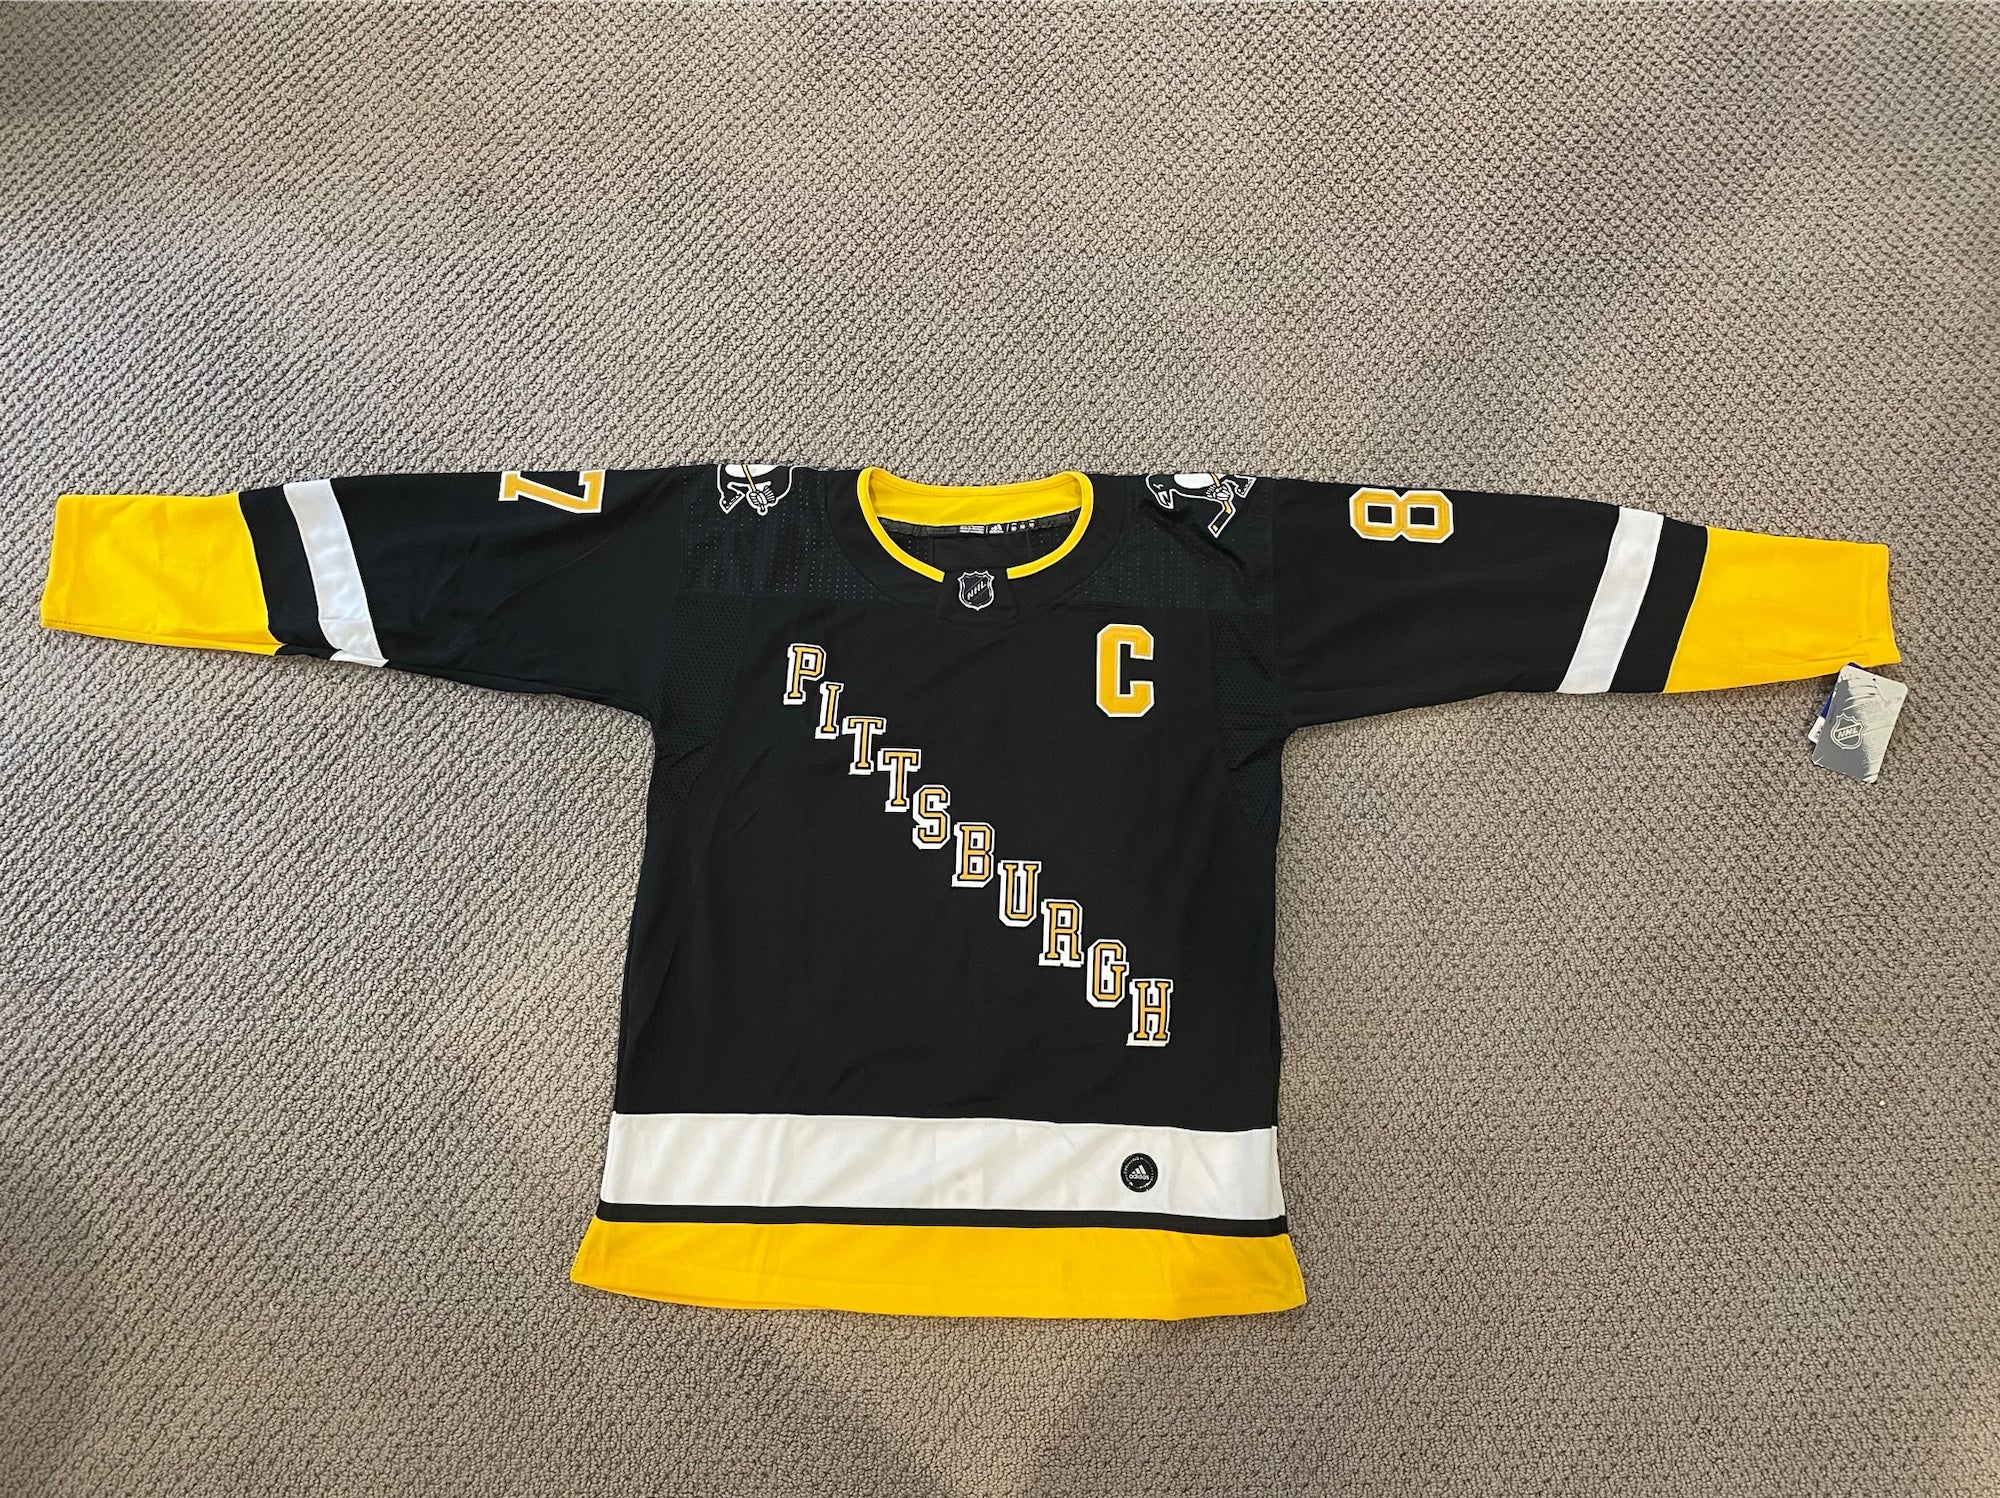 Sidney Crosby - Pittsburgh Penguins - Adidas NWT Alternate Jersey